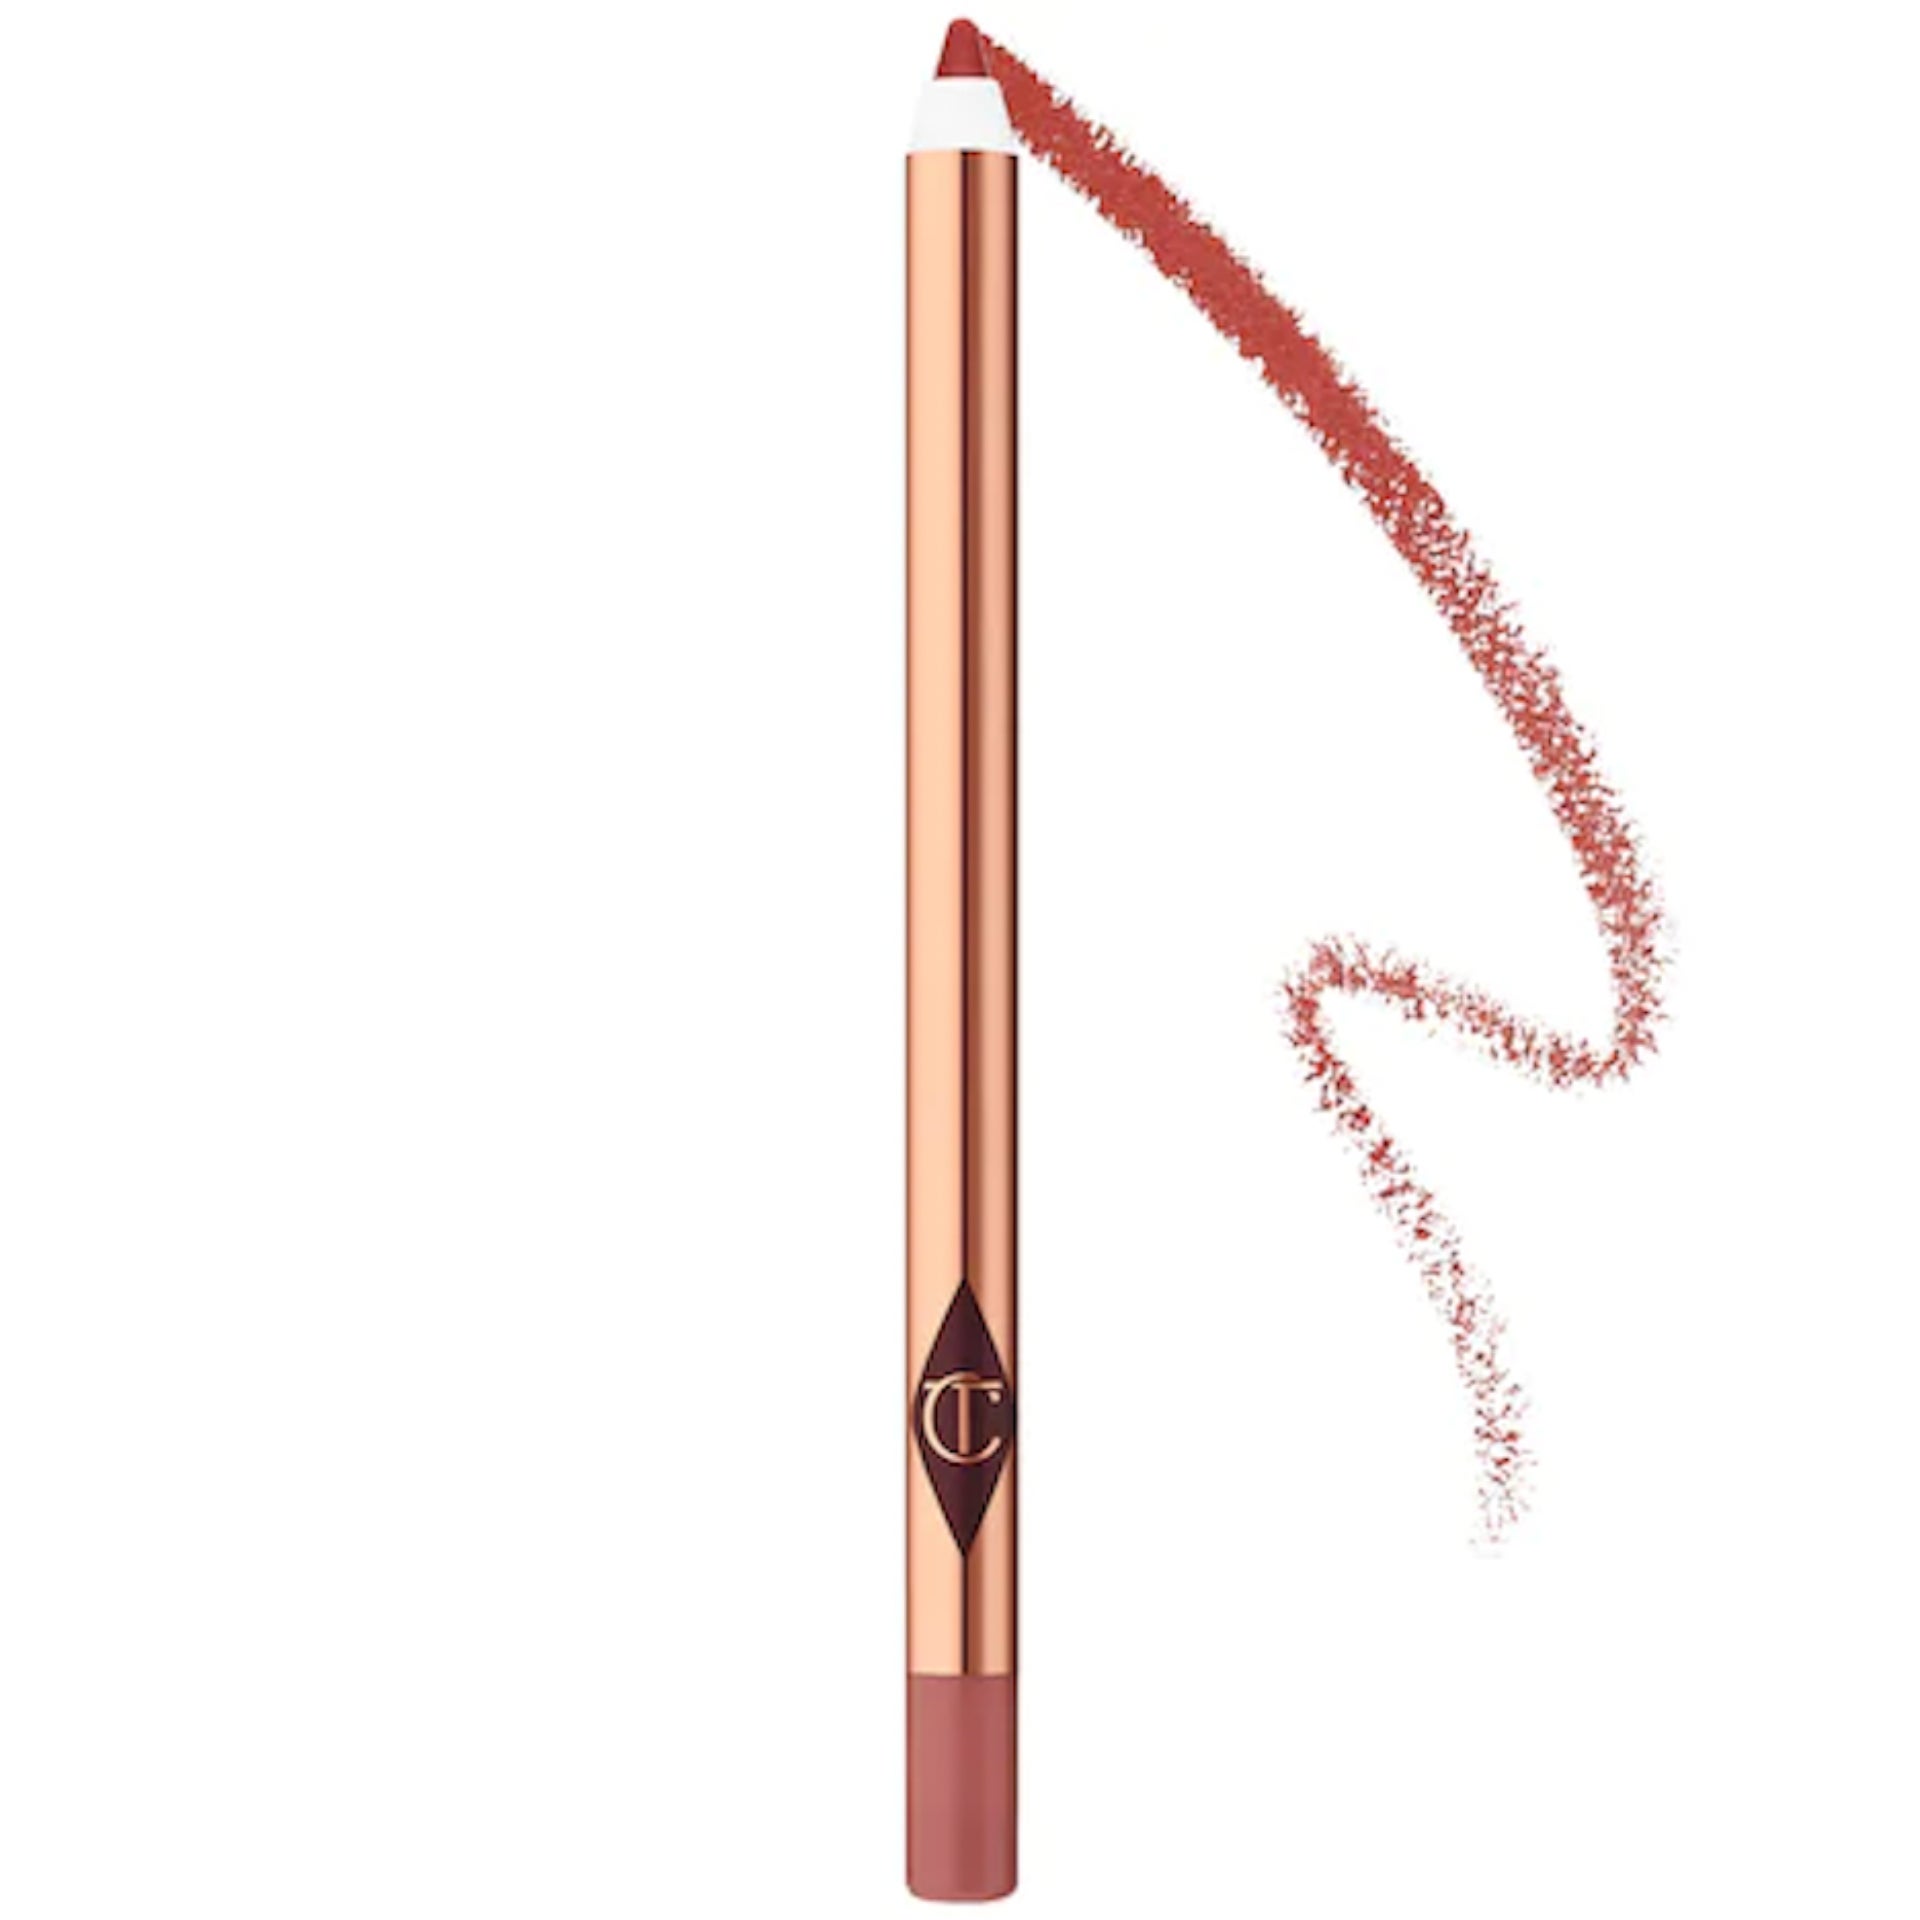 Your Guide To Charlotte Tilbury's Most Popular Products At Sephora